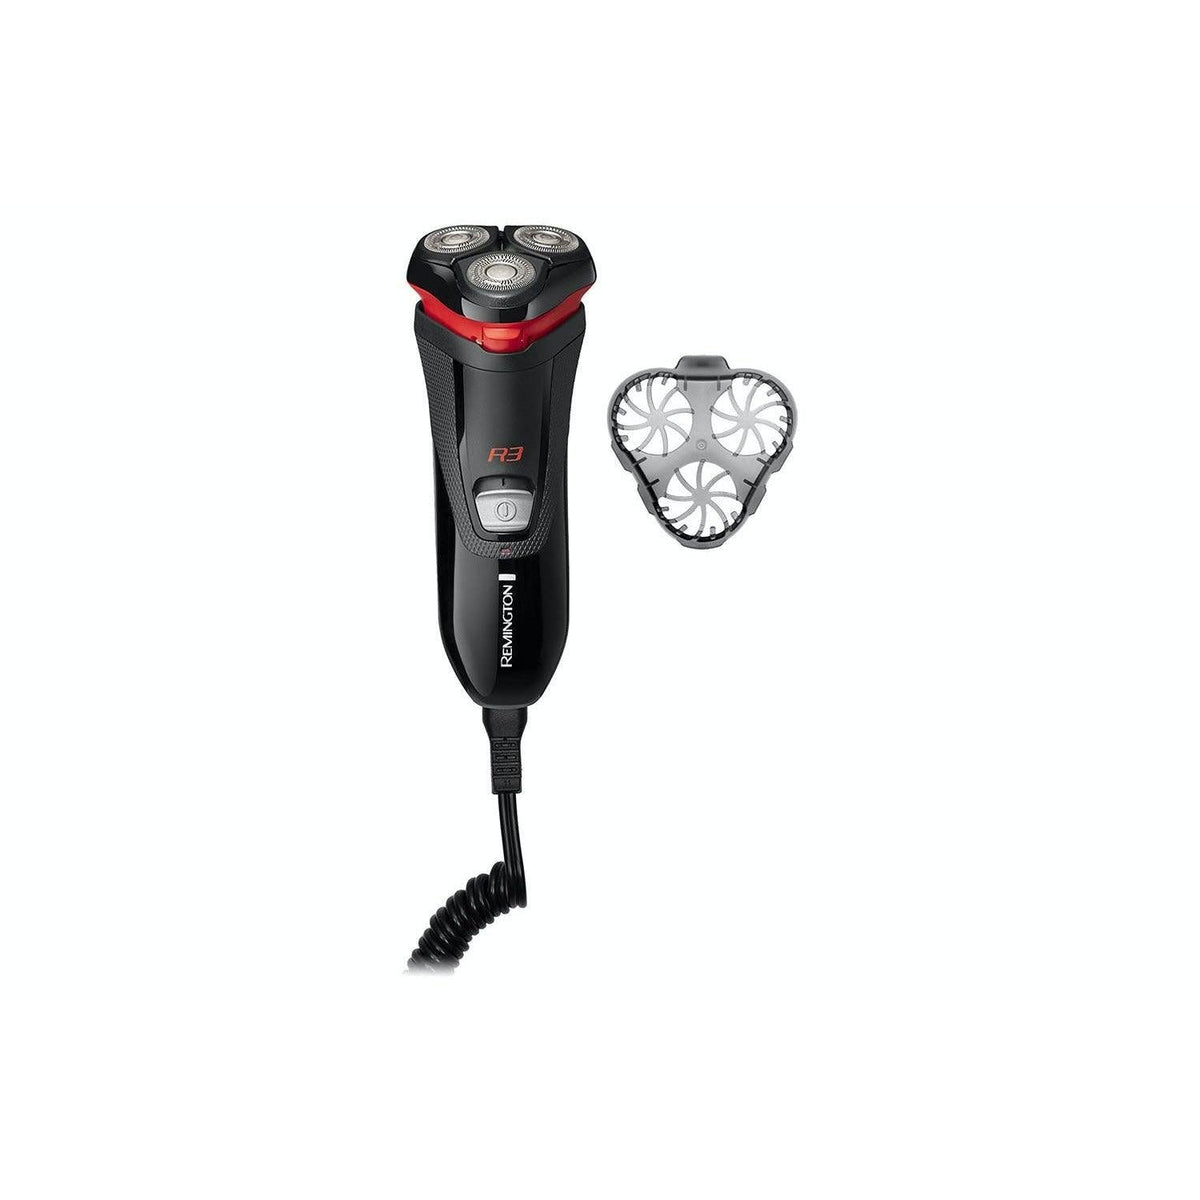 Remington R3000 Series Rotary Shaver - Black | R3000R3 from DID Electrical - guaranteed Irish, guaranteed quality service. (6890860544188)